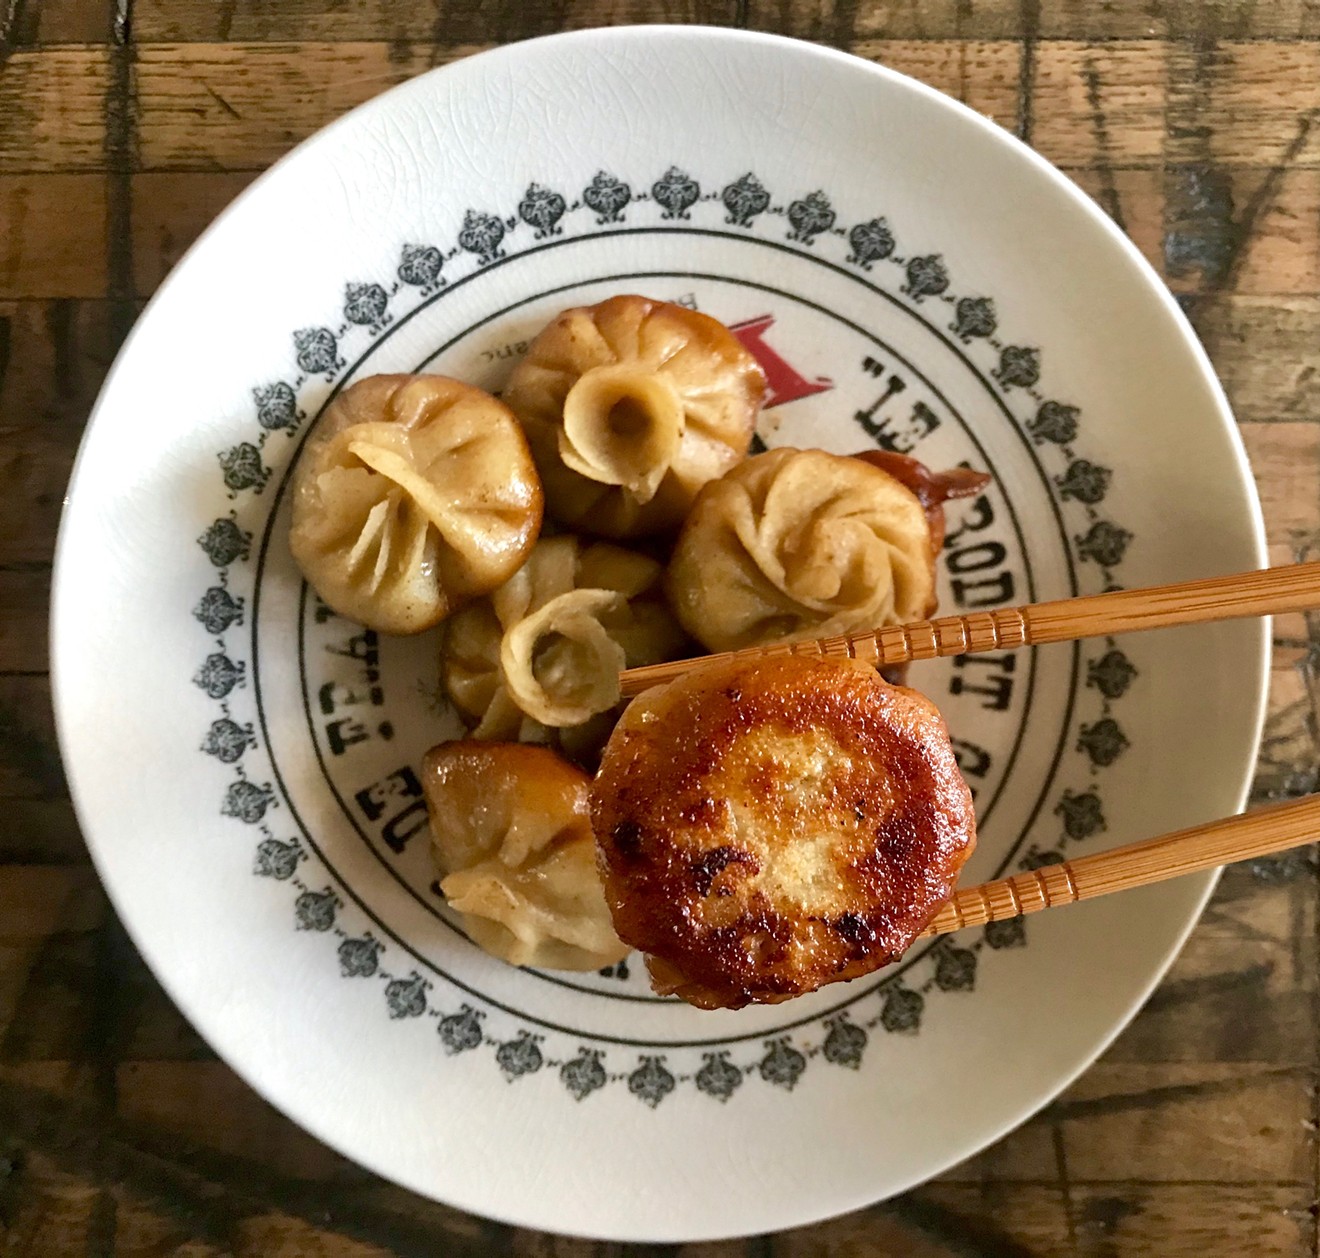 These eggplant dumplings are waiting for you at Yuan Wonton.